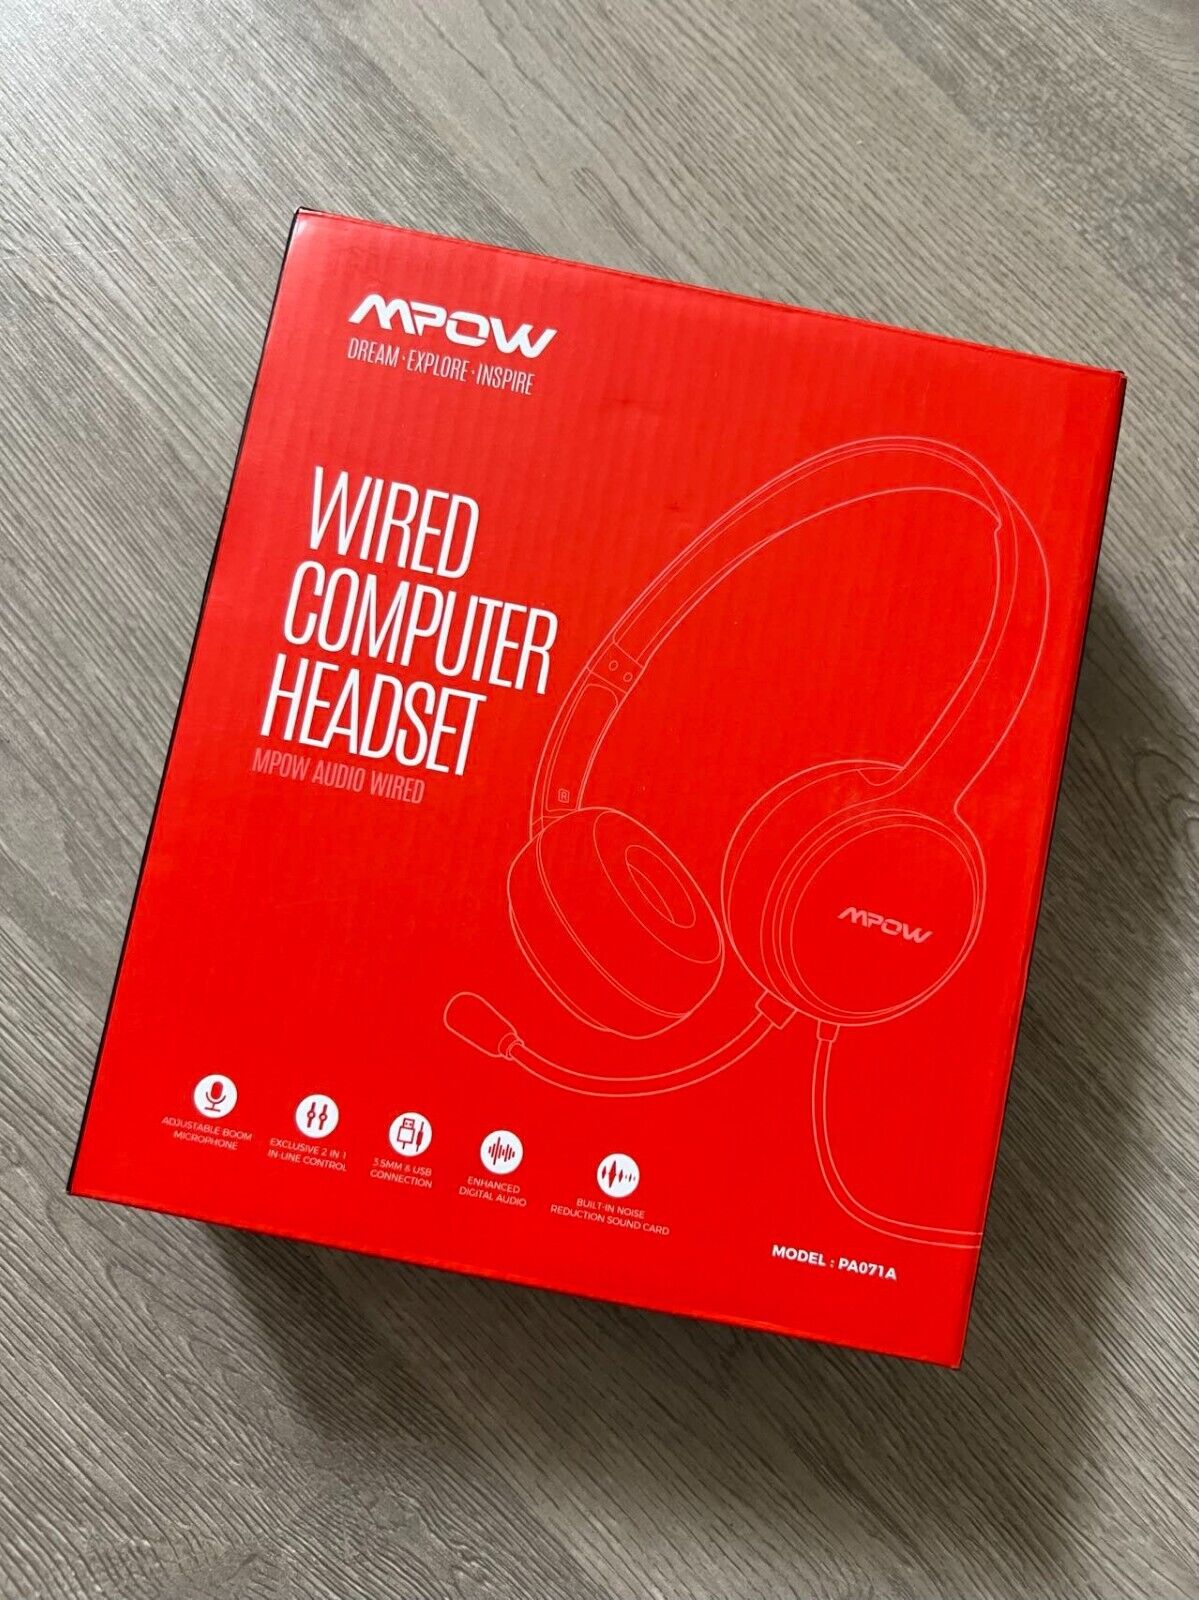 MPOW USB Wired Computer Headset - Noise Reduction, USB PA071A brand new